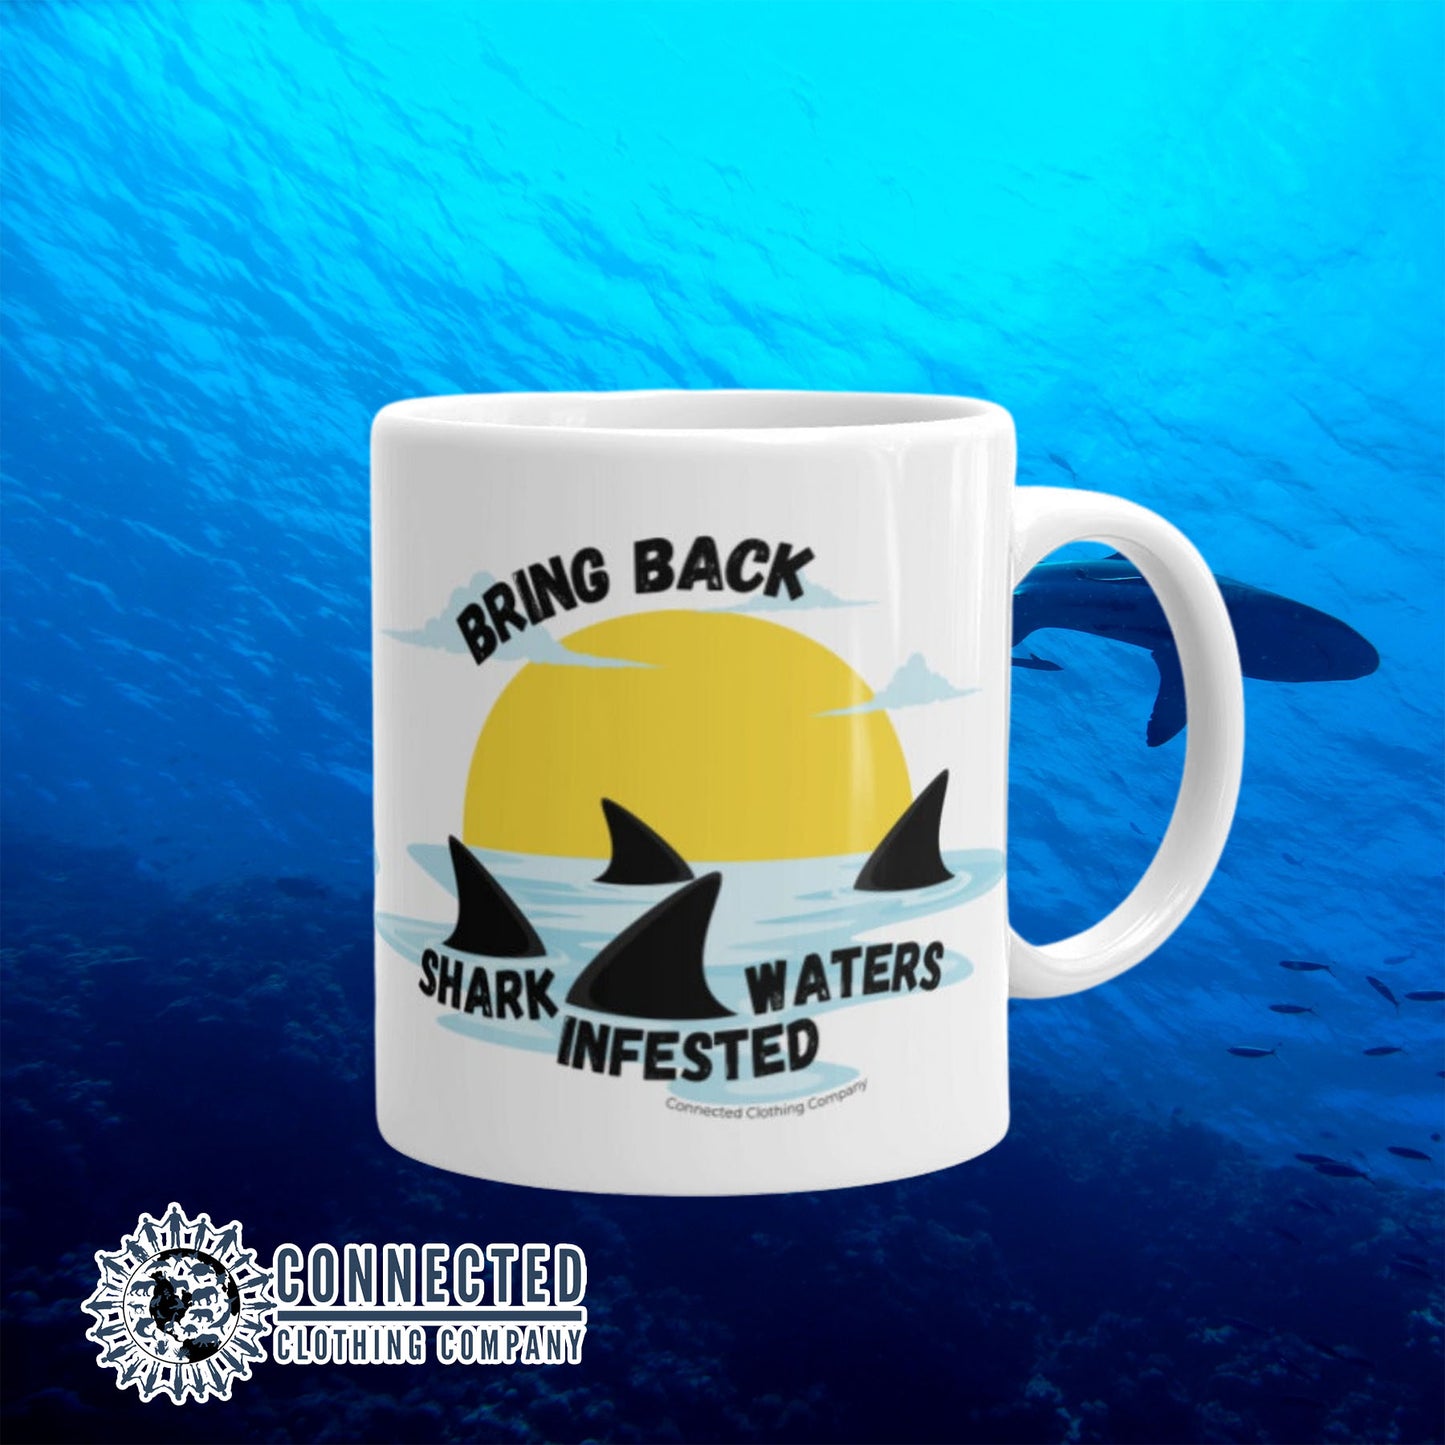 Bring Back Shark Infested Waters Classic Mug - sweetsherriloudesigns - Ethically and Sustainably Made - 10% of profits donated to shark conservation and ocean conservation